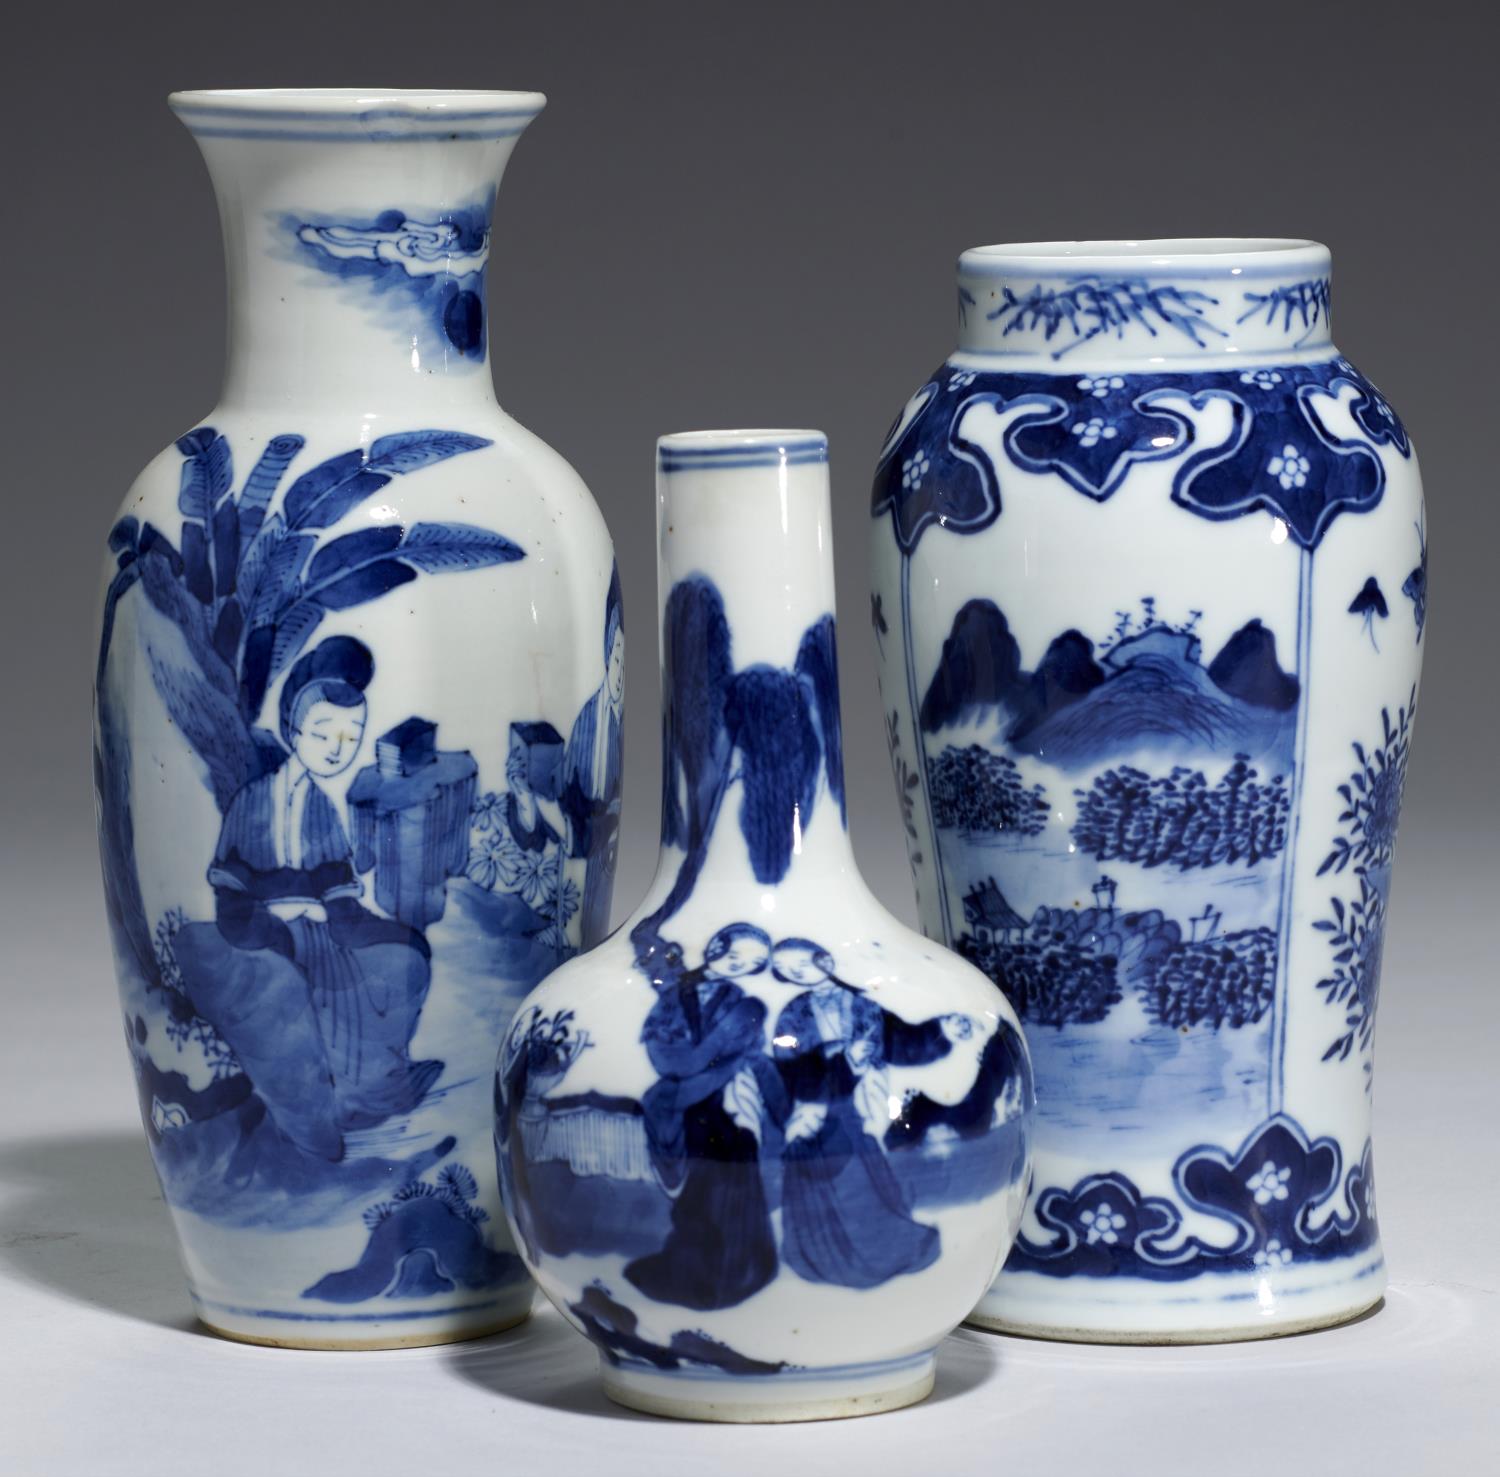 THREE CHINESE BLUE AND WHITE VASES, QING DYNASTY, 19TH C painted with groups of ladies, one with a